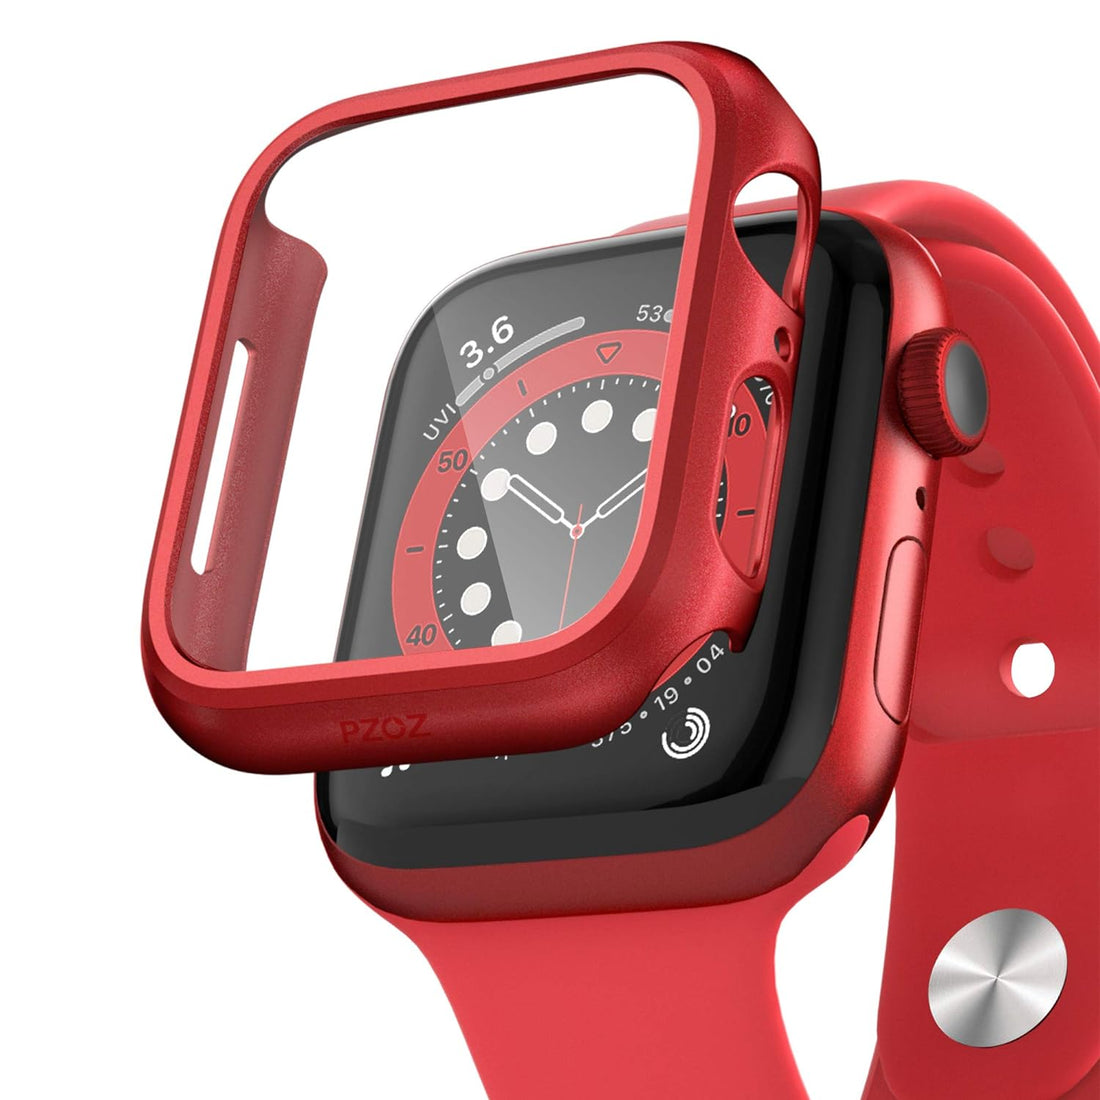 pzoz Compatible Apple Watch Series 6/5 /4 /SE 44mm Case with Screen Protector Accessories Slim Guard Thin Bumper Full Coverage Matte Hard Cover Defense Edge for Women Men New Gen GPS iWatch (Red)